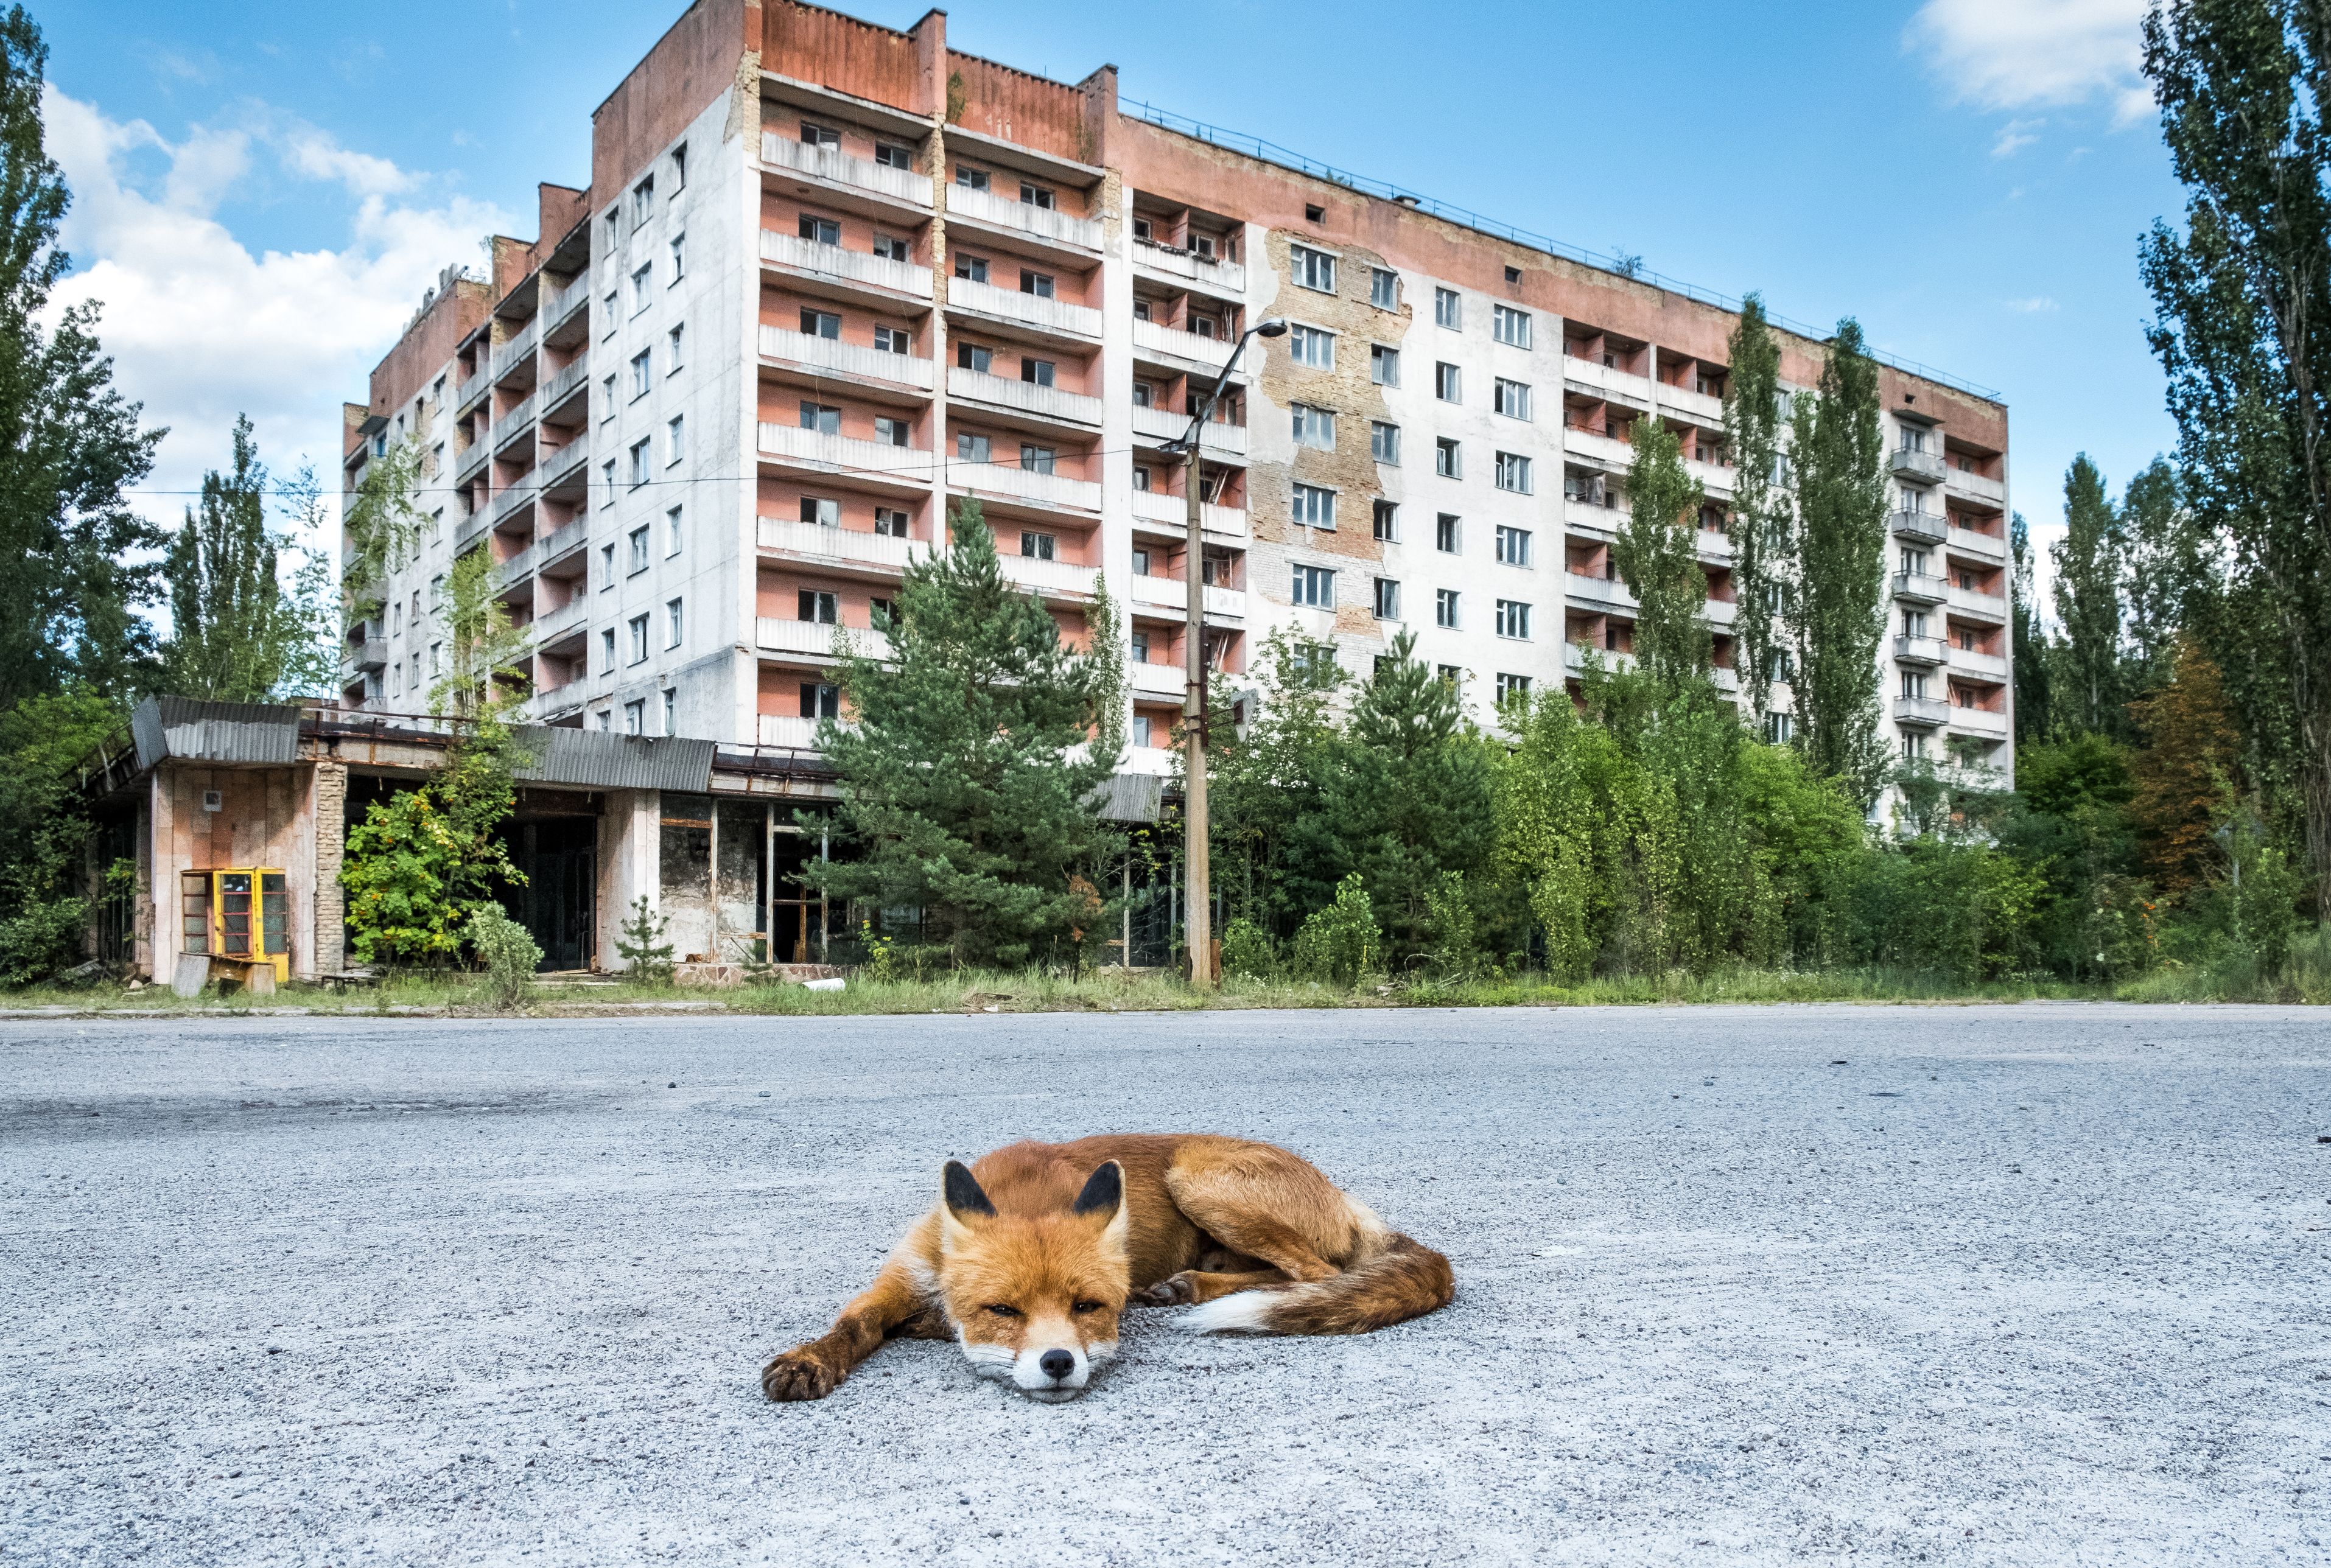 8 Facts About The Animals Of Chernobyl Mental Floss